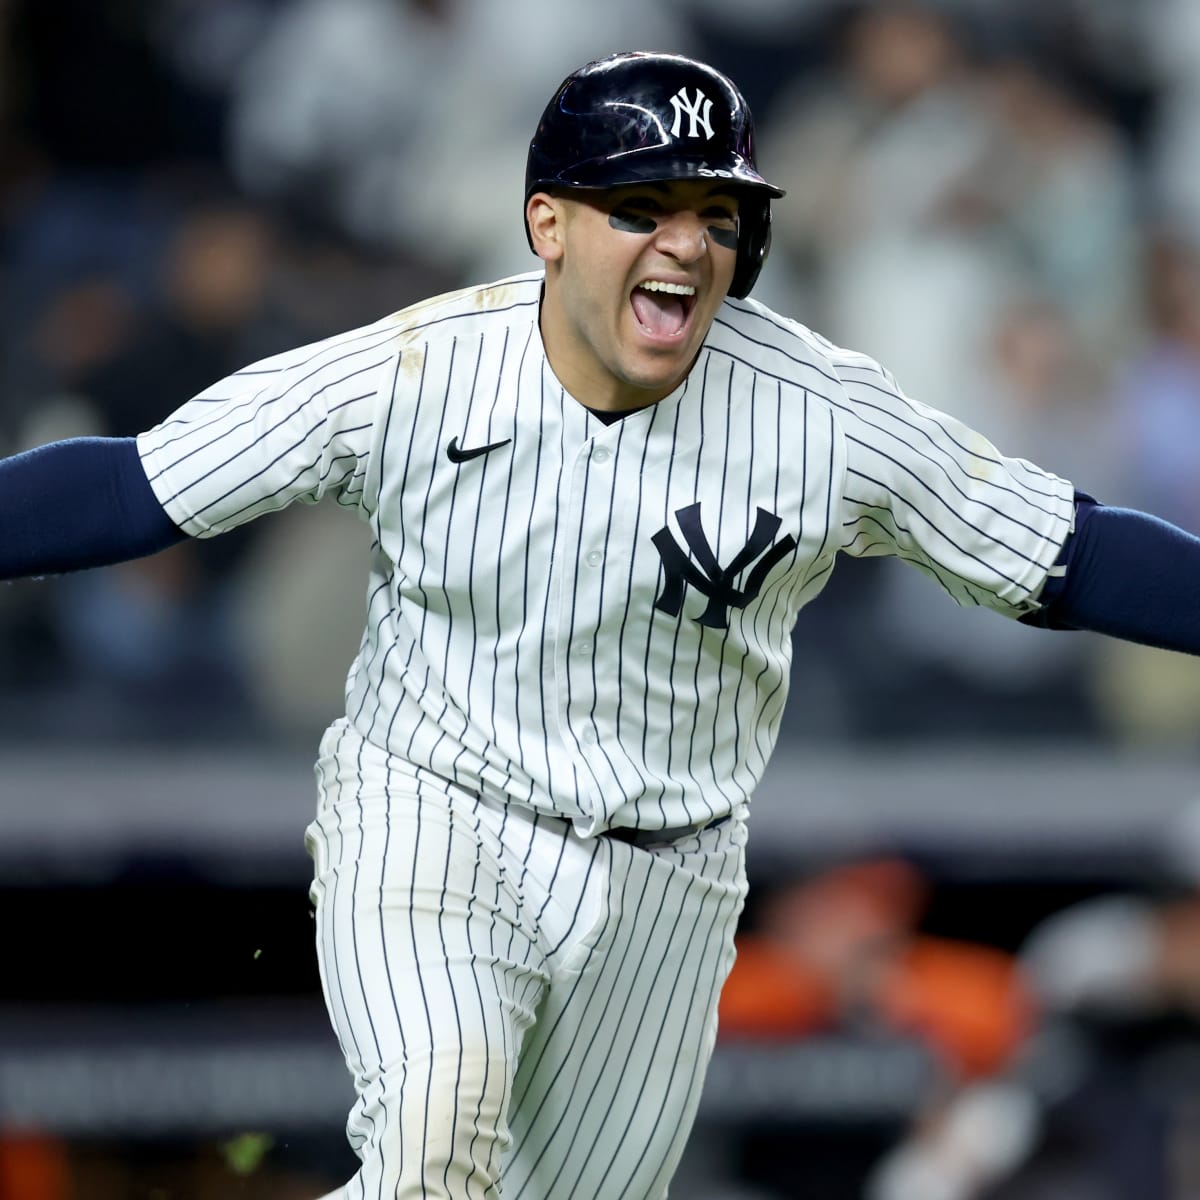 Catching Up with CC Native & New York Yankees Player Jose Trevino